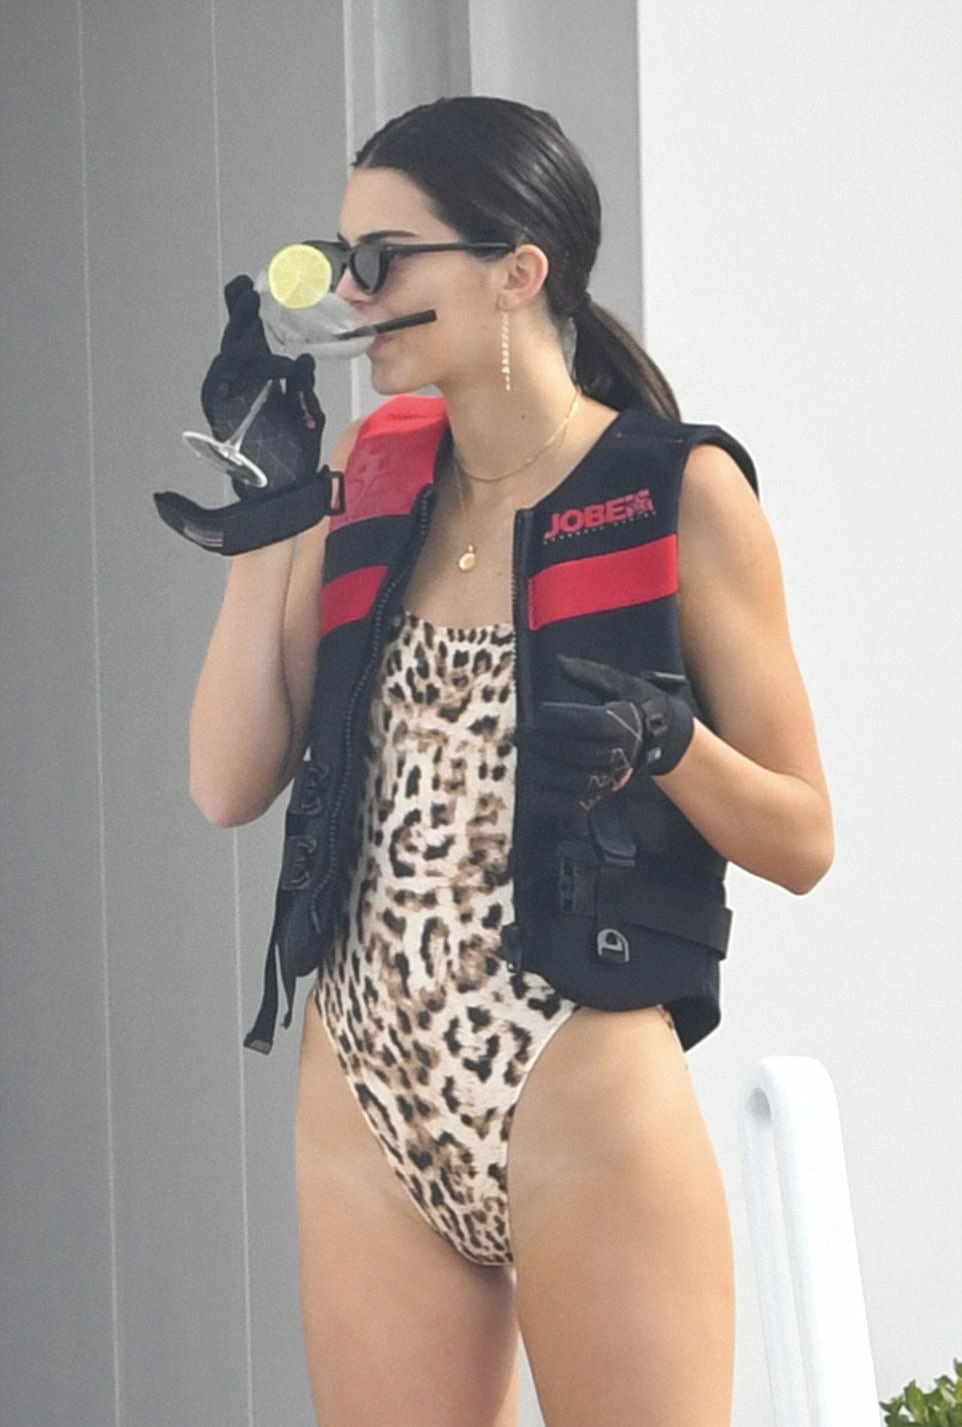 Kendall Jenner sexy swimsuit candids on a yacht in Antibes 198x MixQ photos 170.jpg